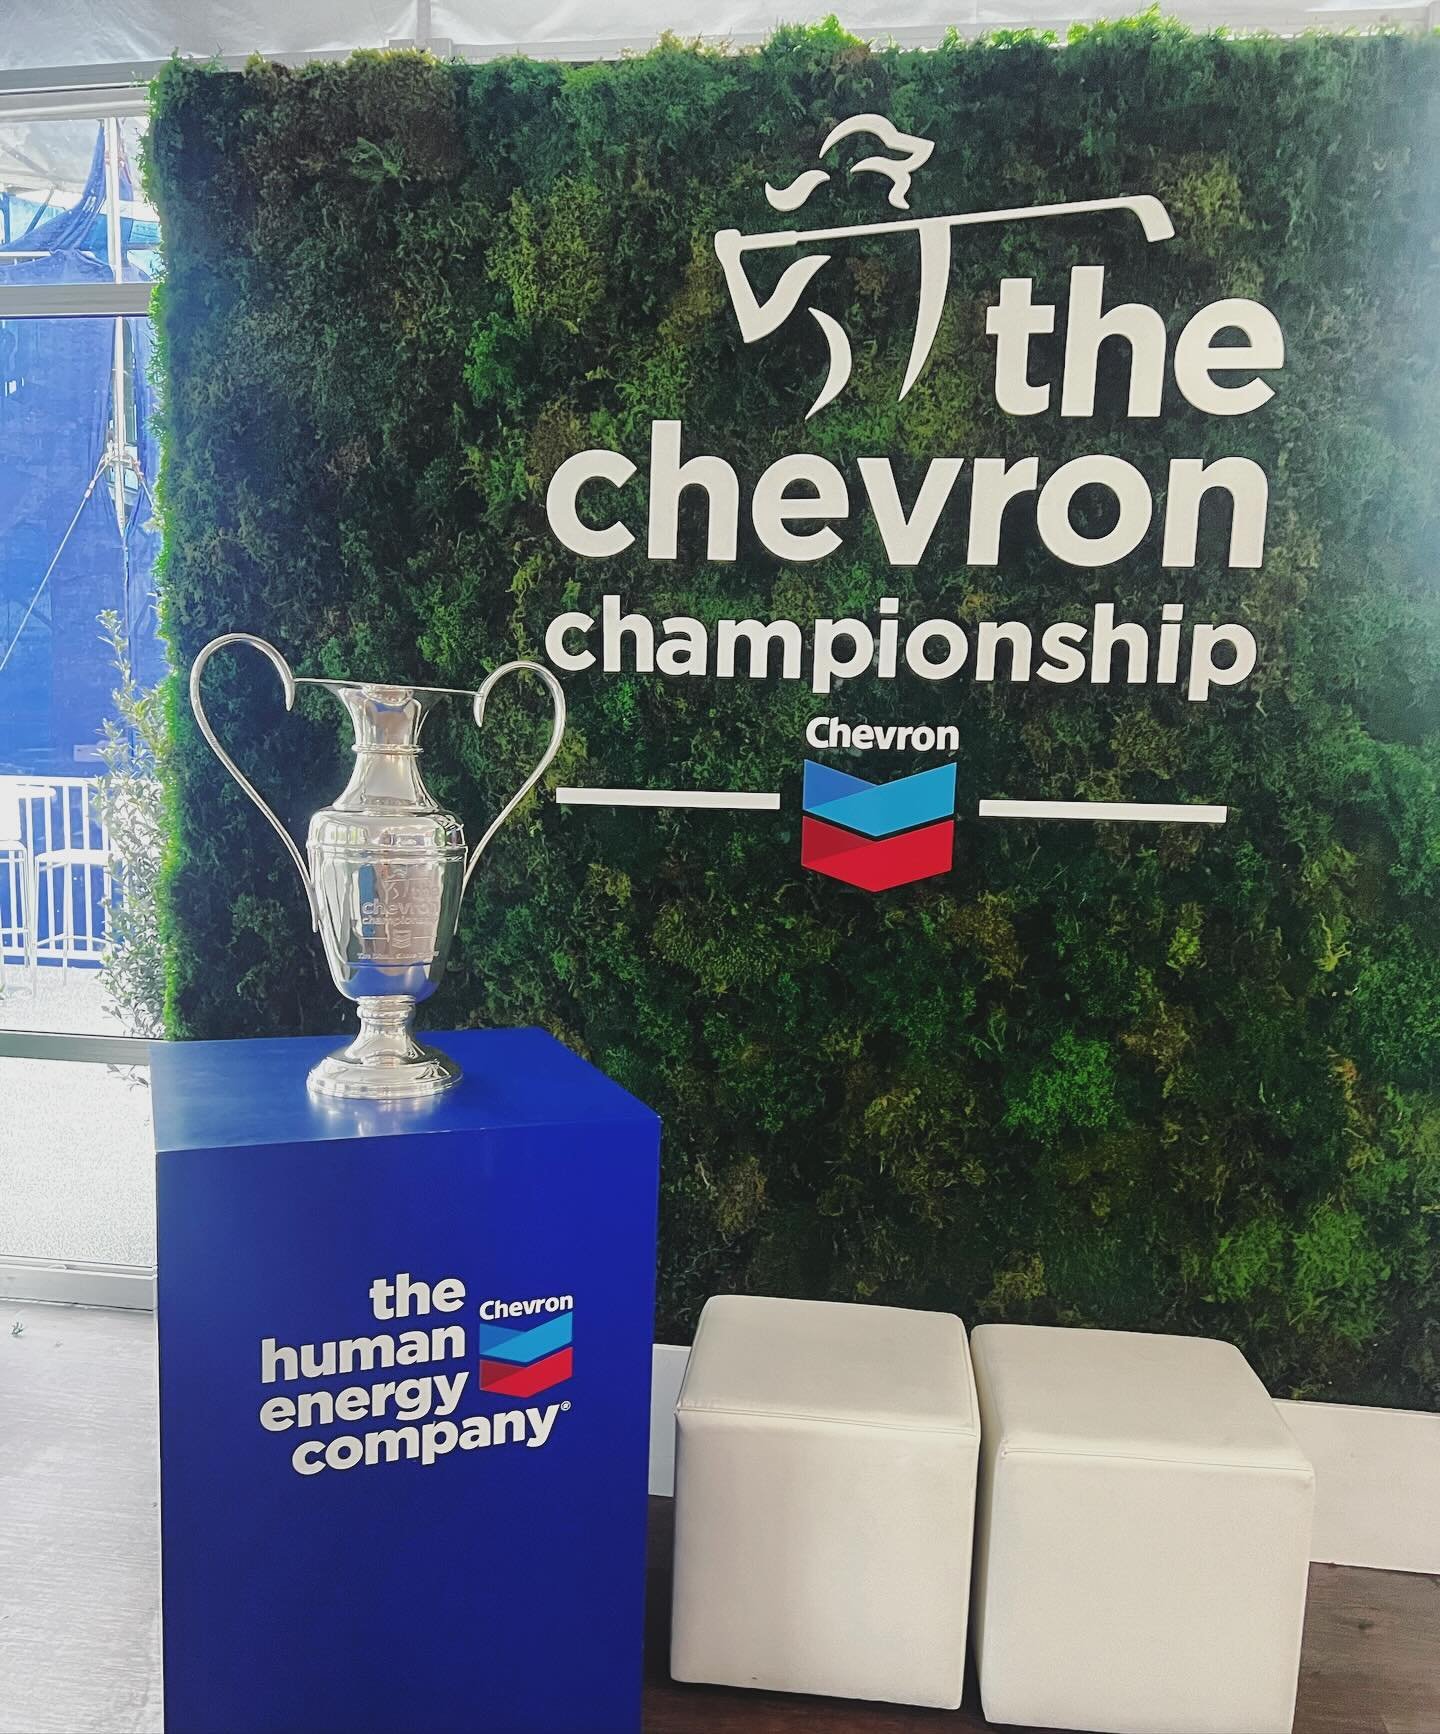 Out at @theclubatcw for the final round of @thechevronchampionship. We can&rsquo;t wait to see who will bring home this gorgeous trophy later today!
#tcc #theChevronchampionship #theclubatcarltonwood